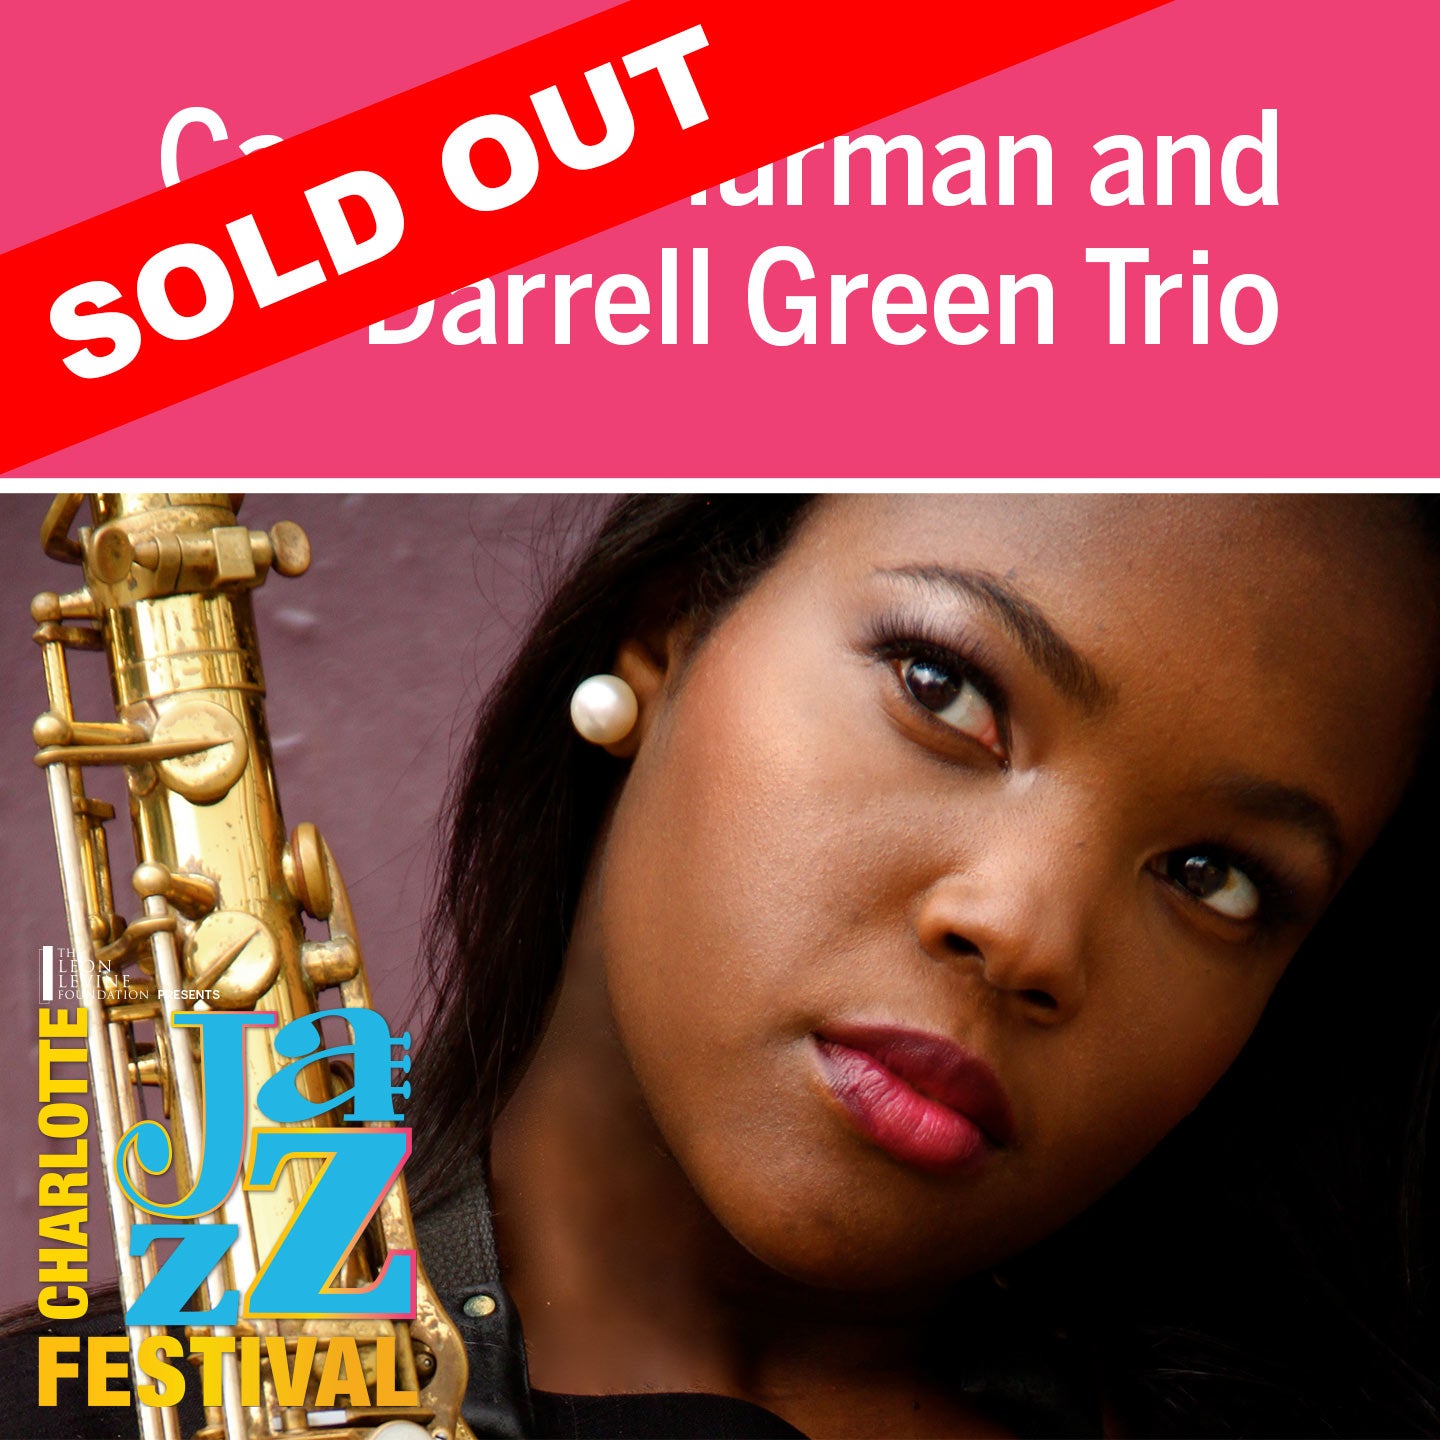 Camille Thurman and the Darrell Green Trio